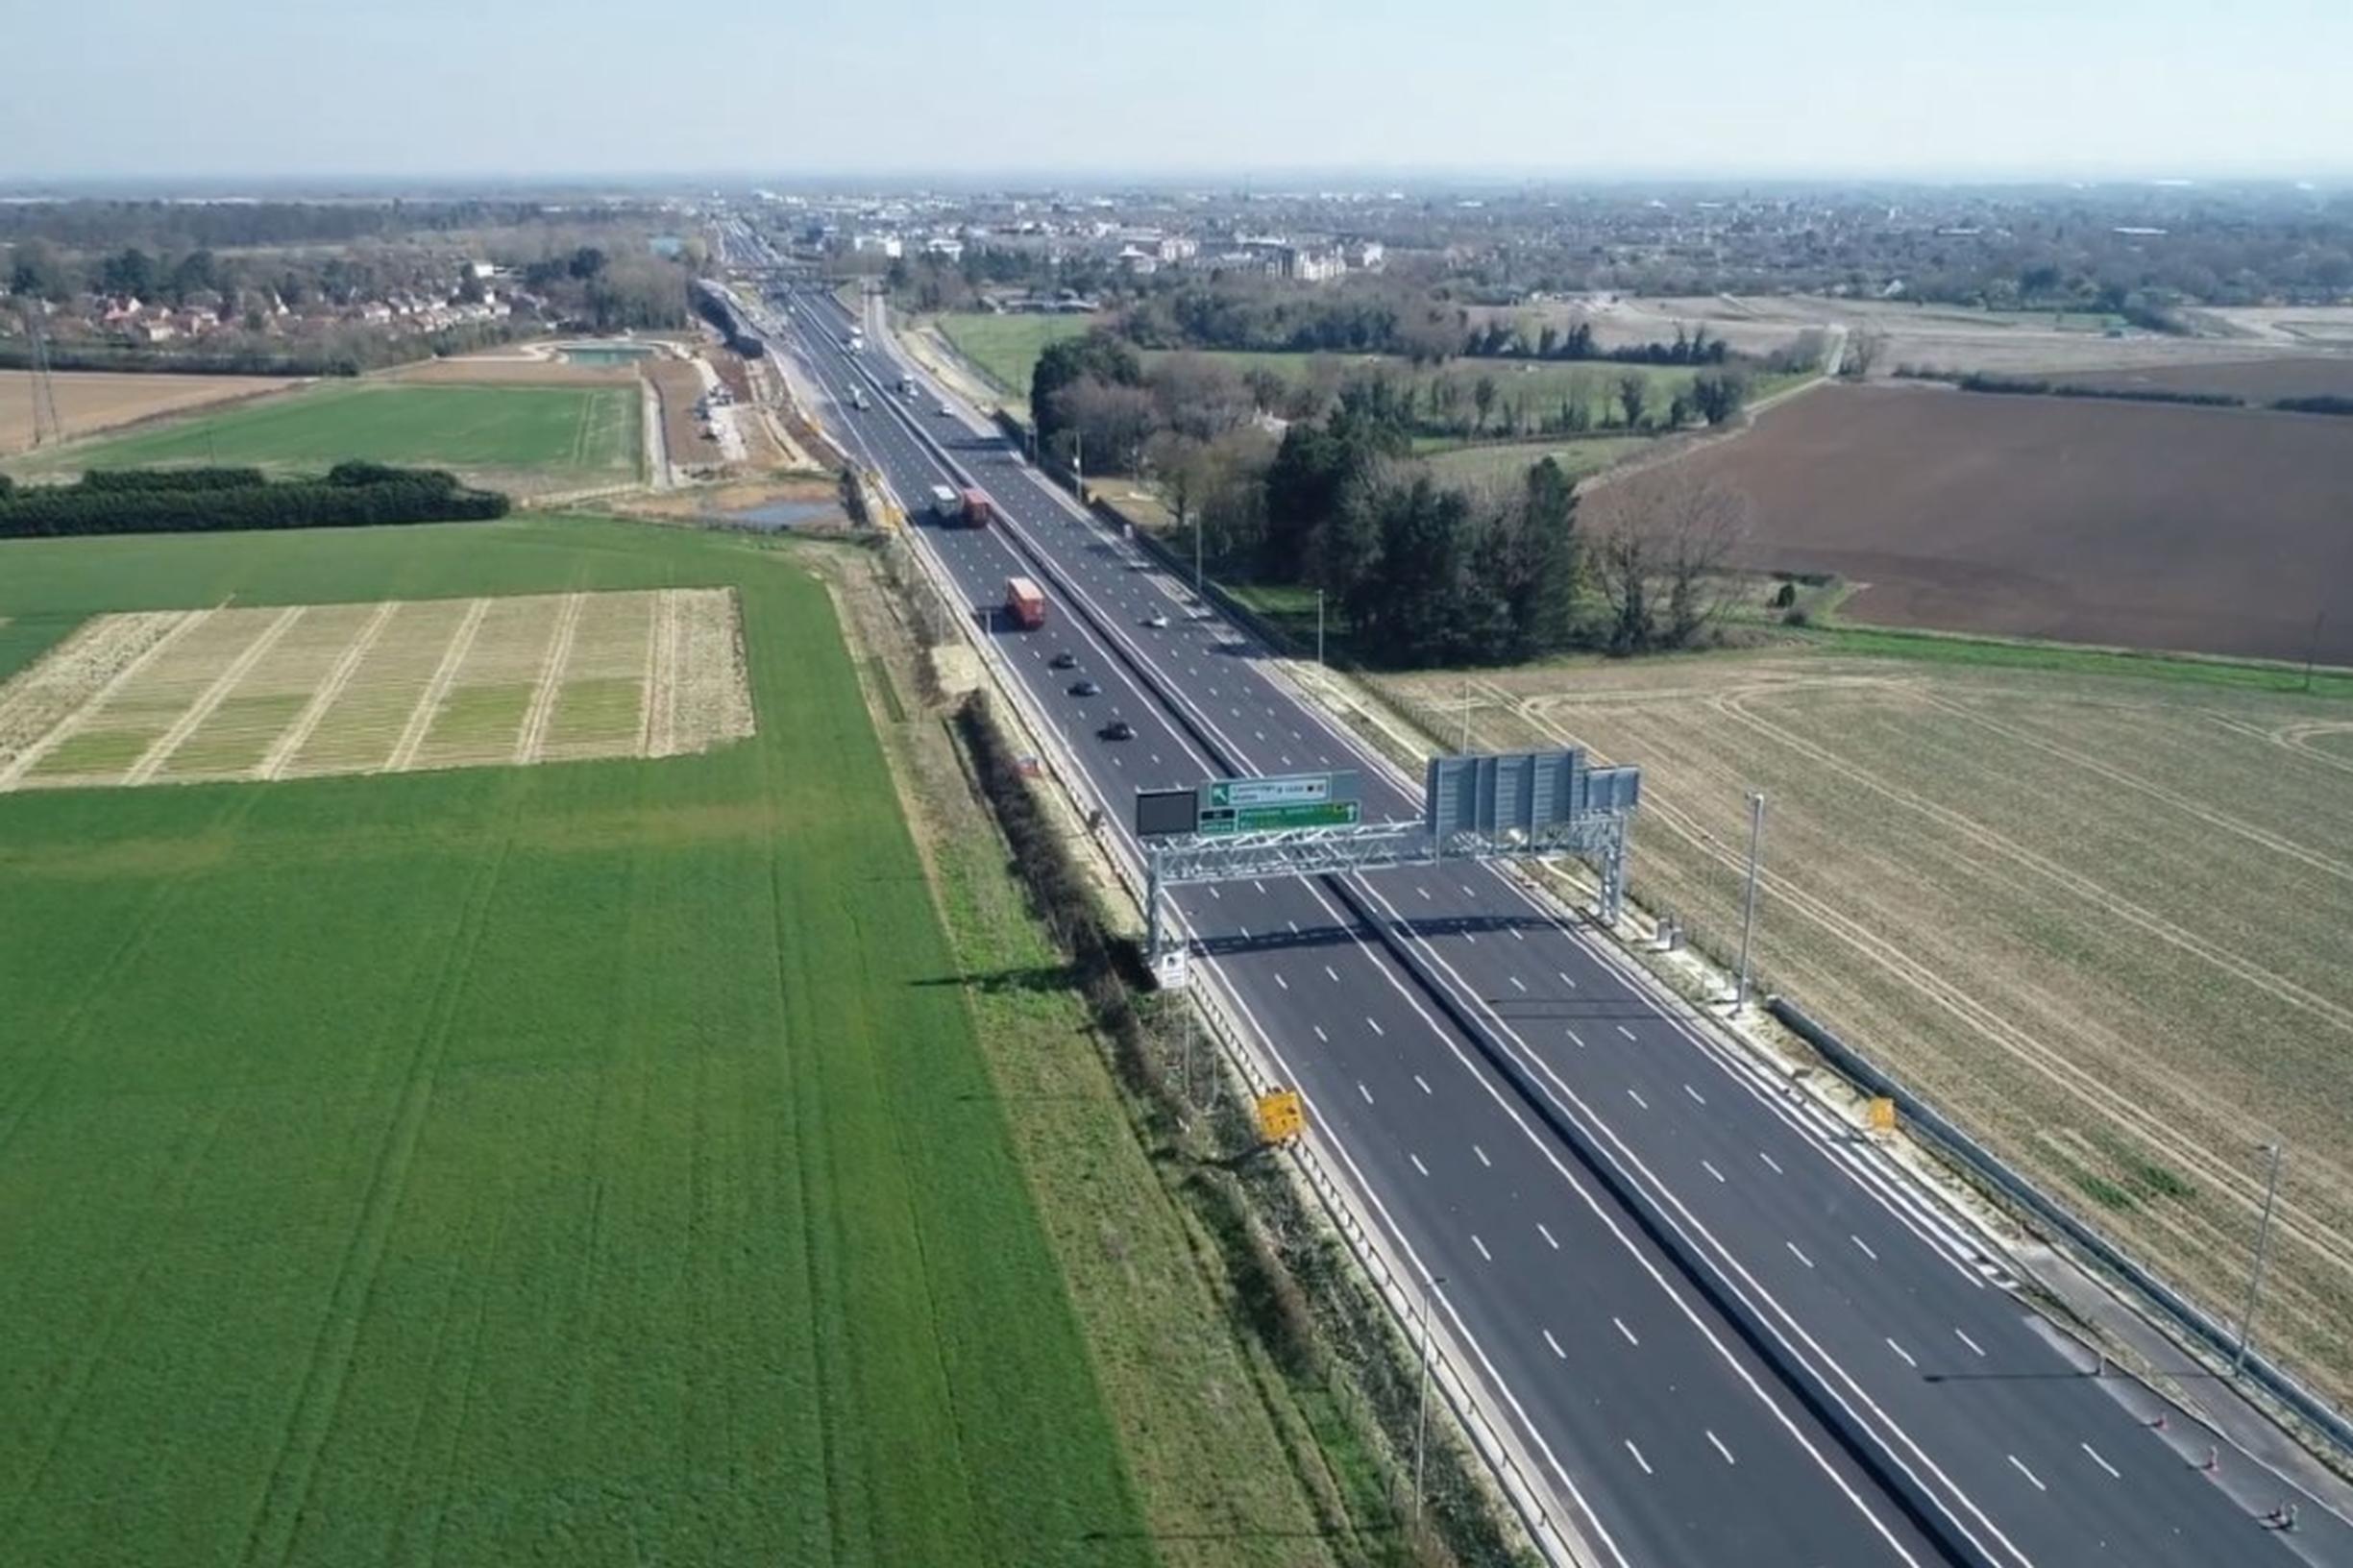 The A14 Cambridge to Huntingdon scheme is designed strengthen links between the Midlands and the East of England